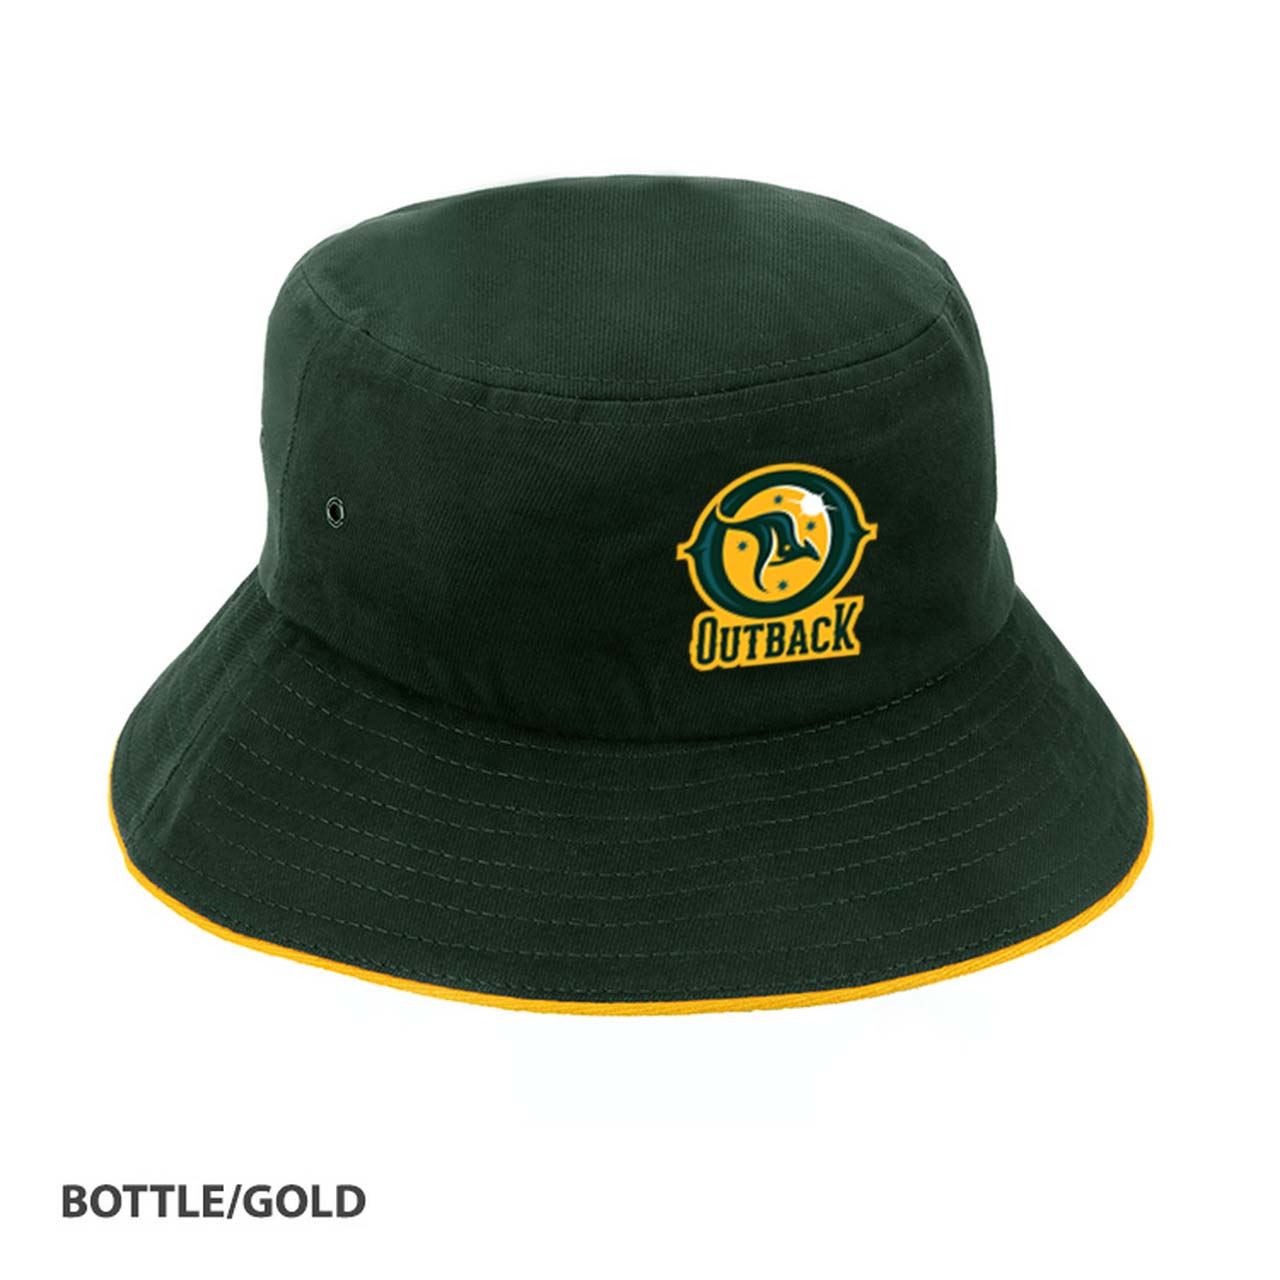 Outback Bucket hat